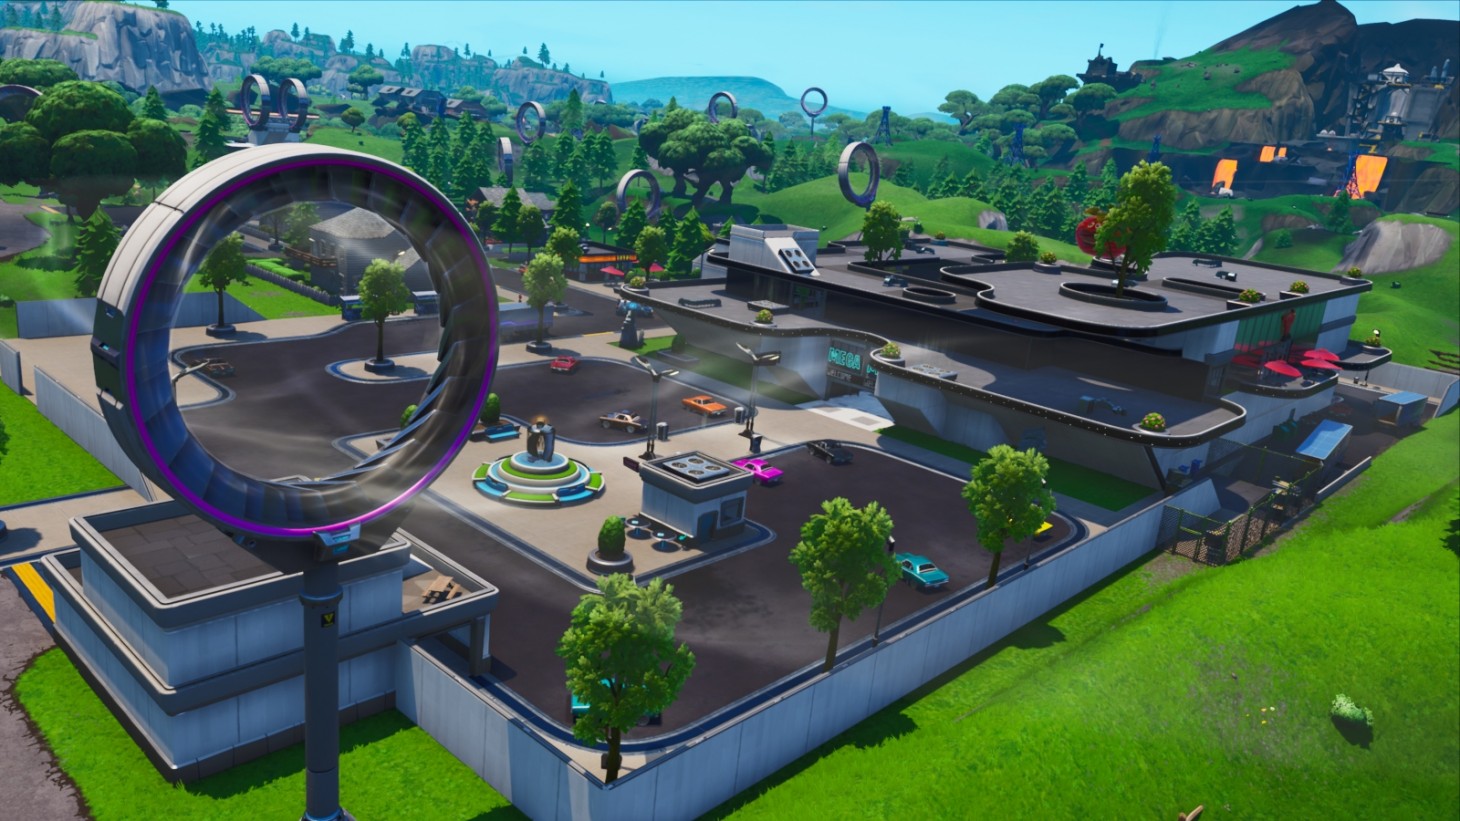 Epic Games to change over North Carolina shopping center into new global headquarters by 2024